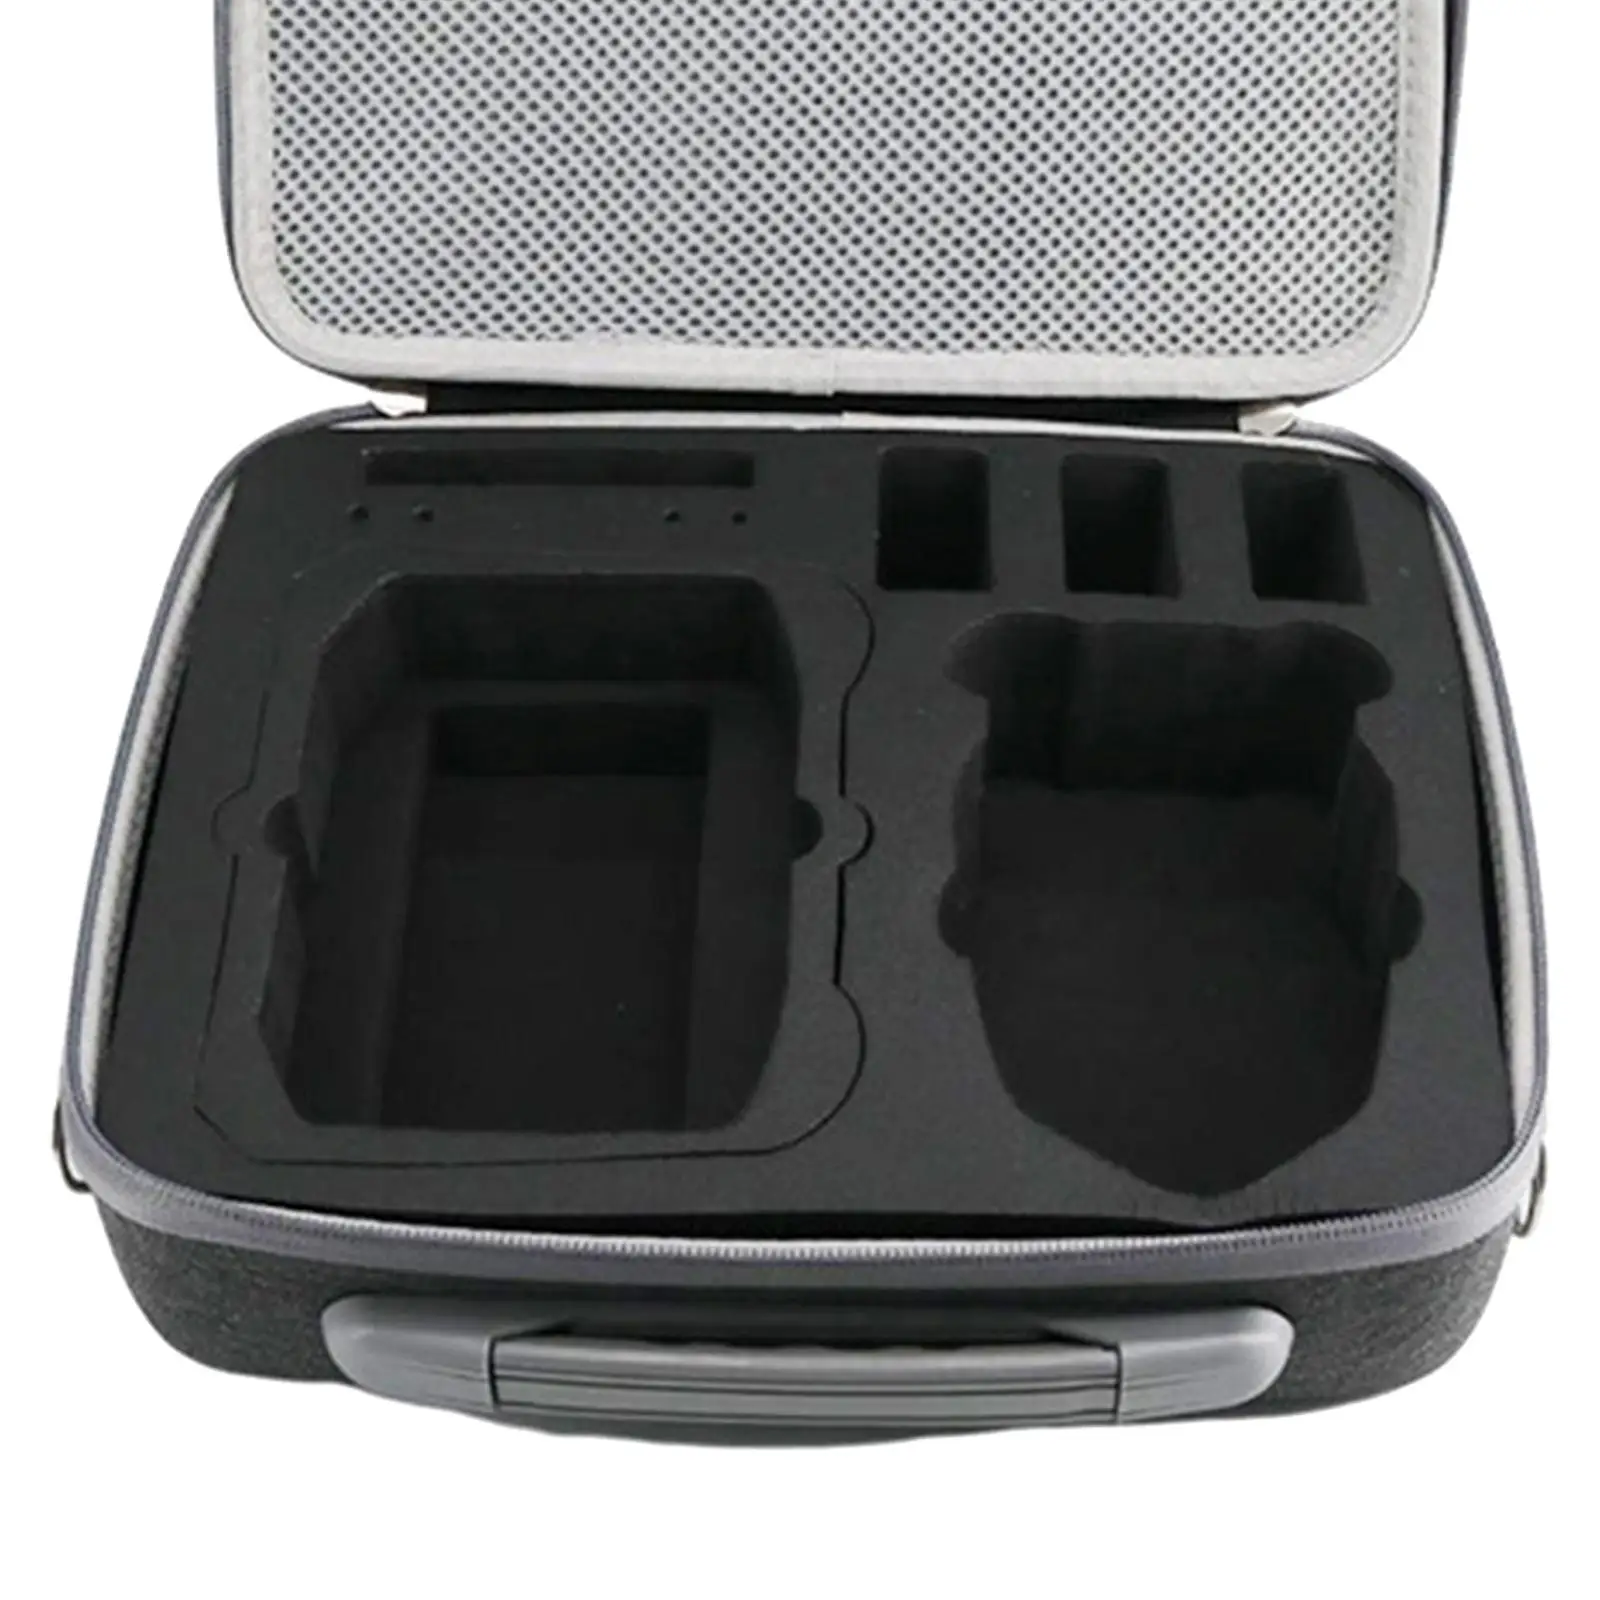 Travel Carrying Case Pressure Resistance Travel Case Durable Large Capacity Hard Case Storage Shoulder Bag for Drone Accessories